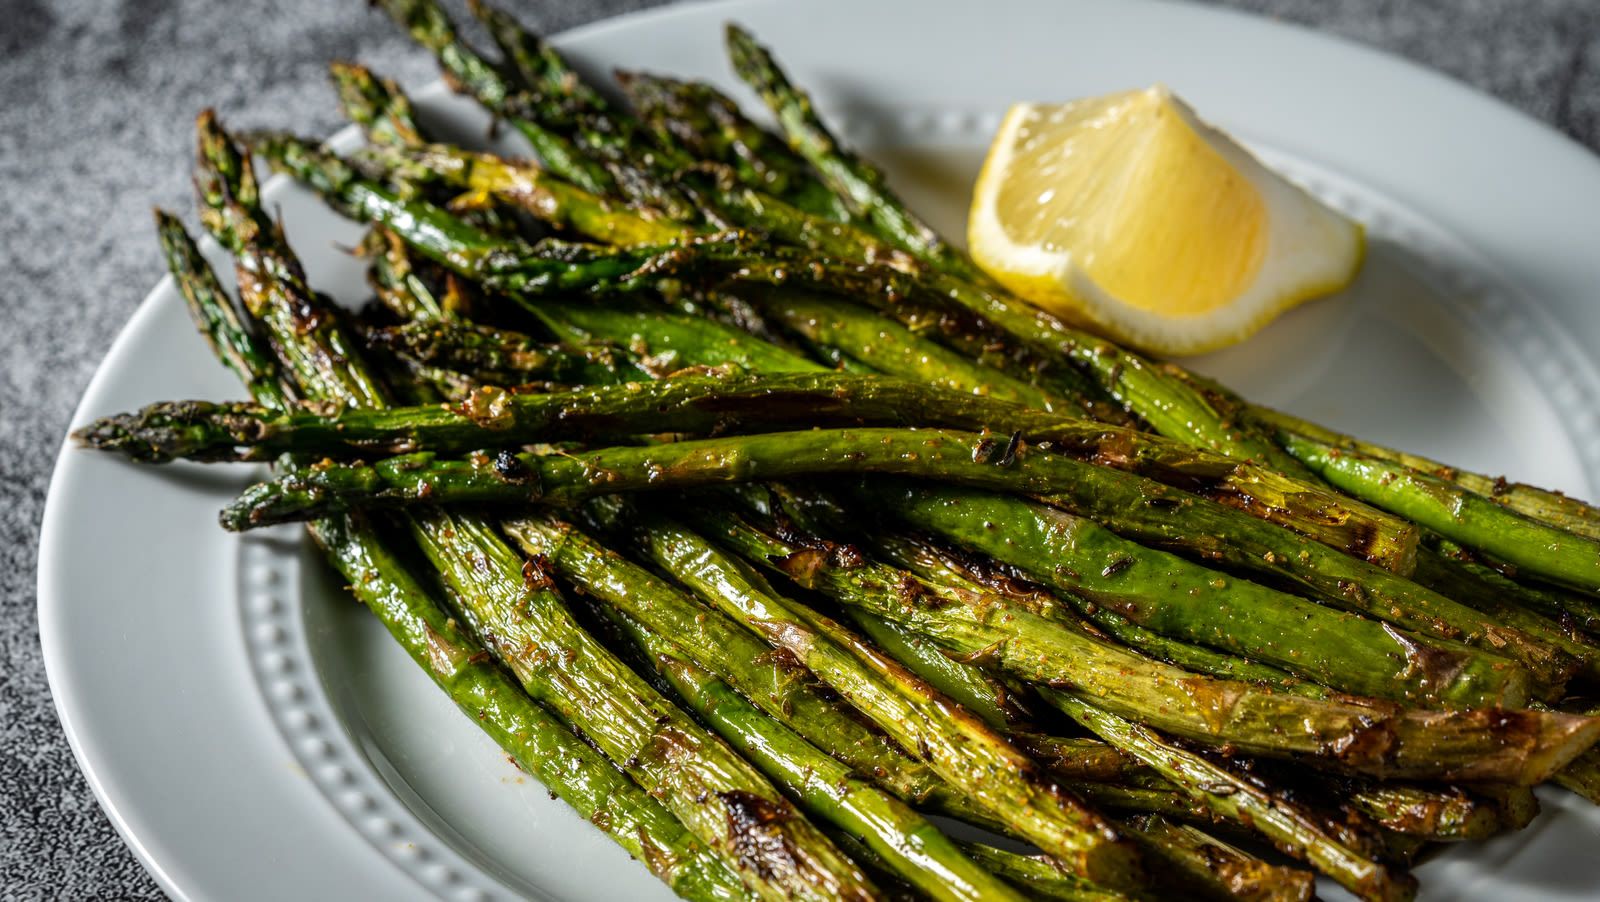 Grill Your Asparagus In Foil For Tender, Delicious Stalks